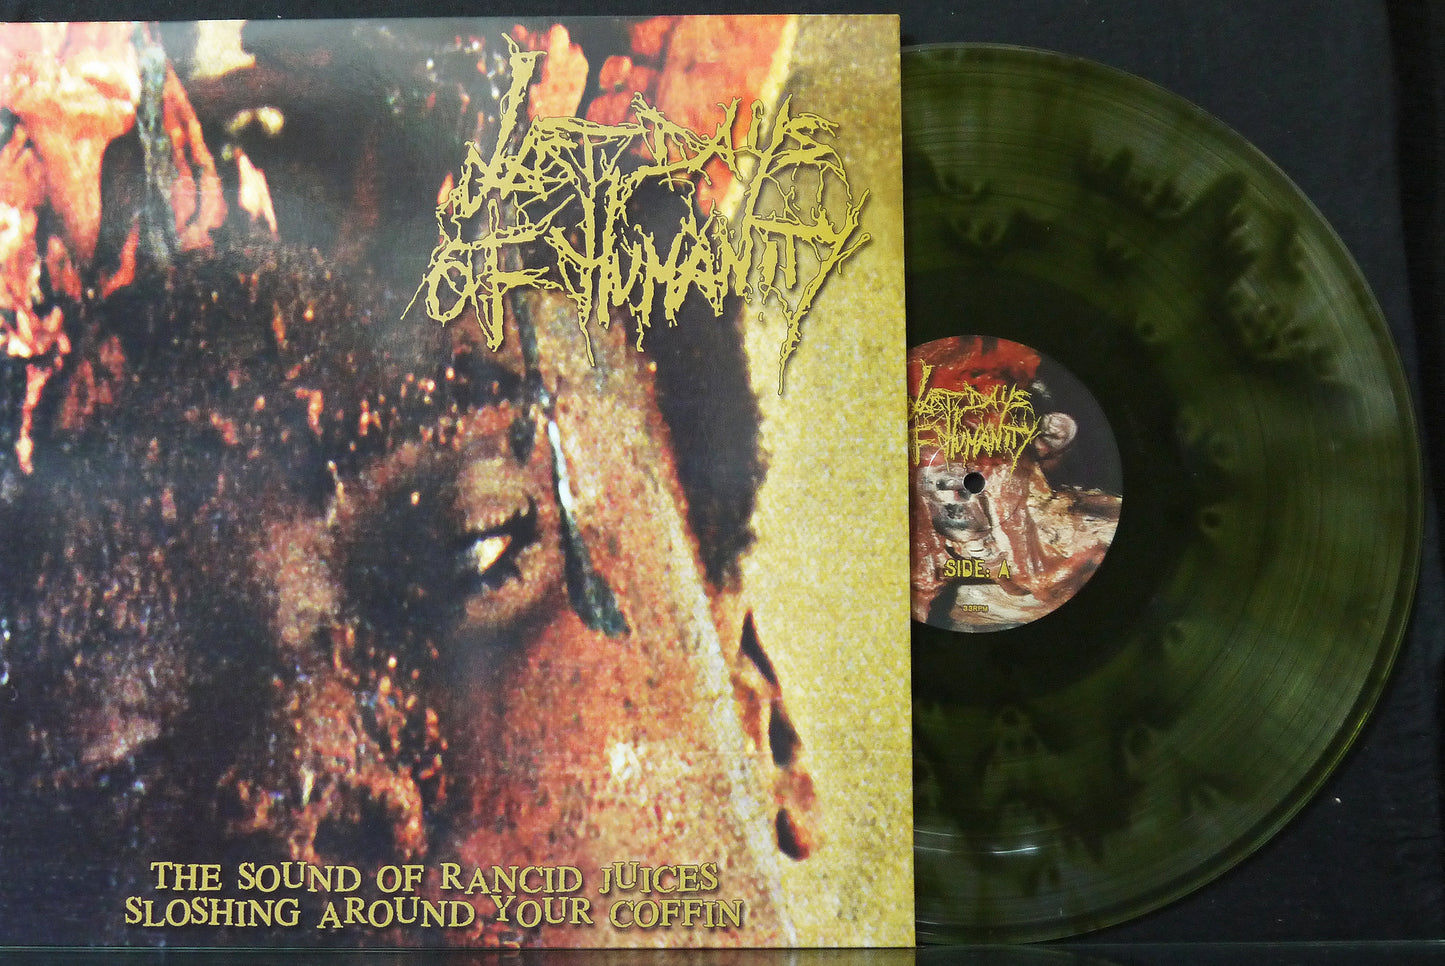 LAST DAYS OF HUMANITY - The Sound Of Rancid Juices Sloshing Around Your Coffin 12"